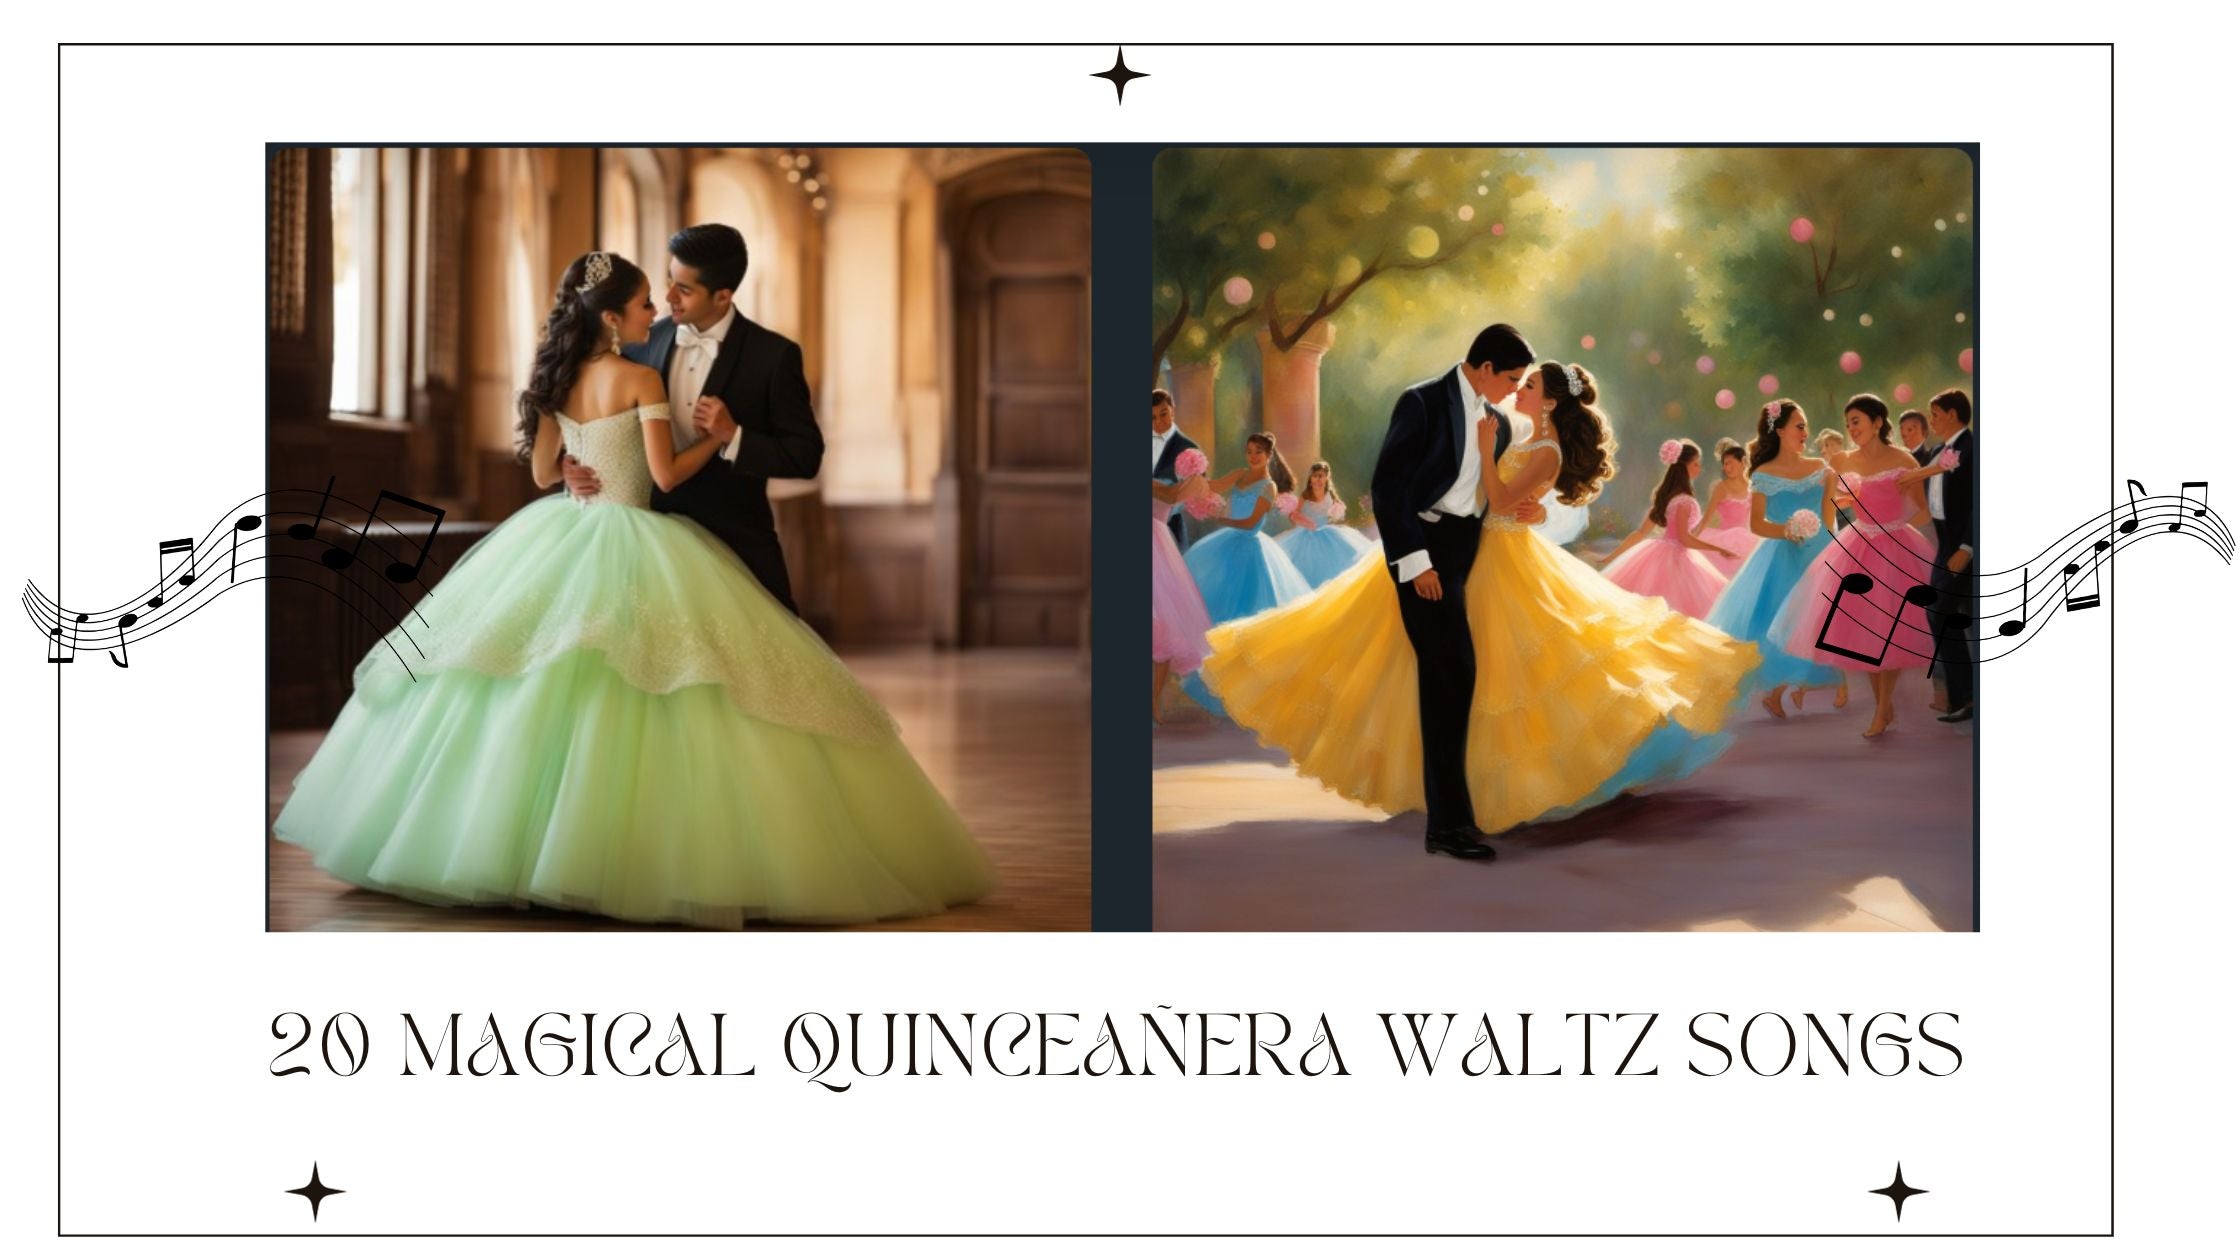 20 Enchanting Quinceanera Songs for Your Magical Waltz